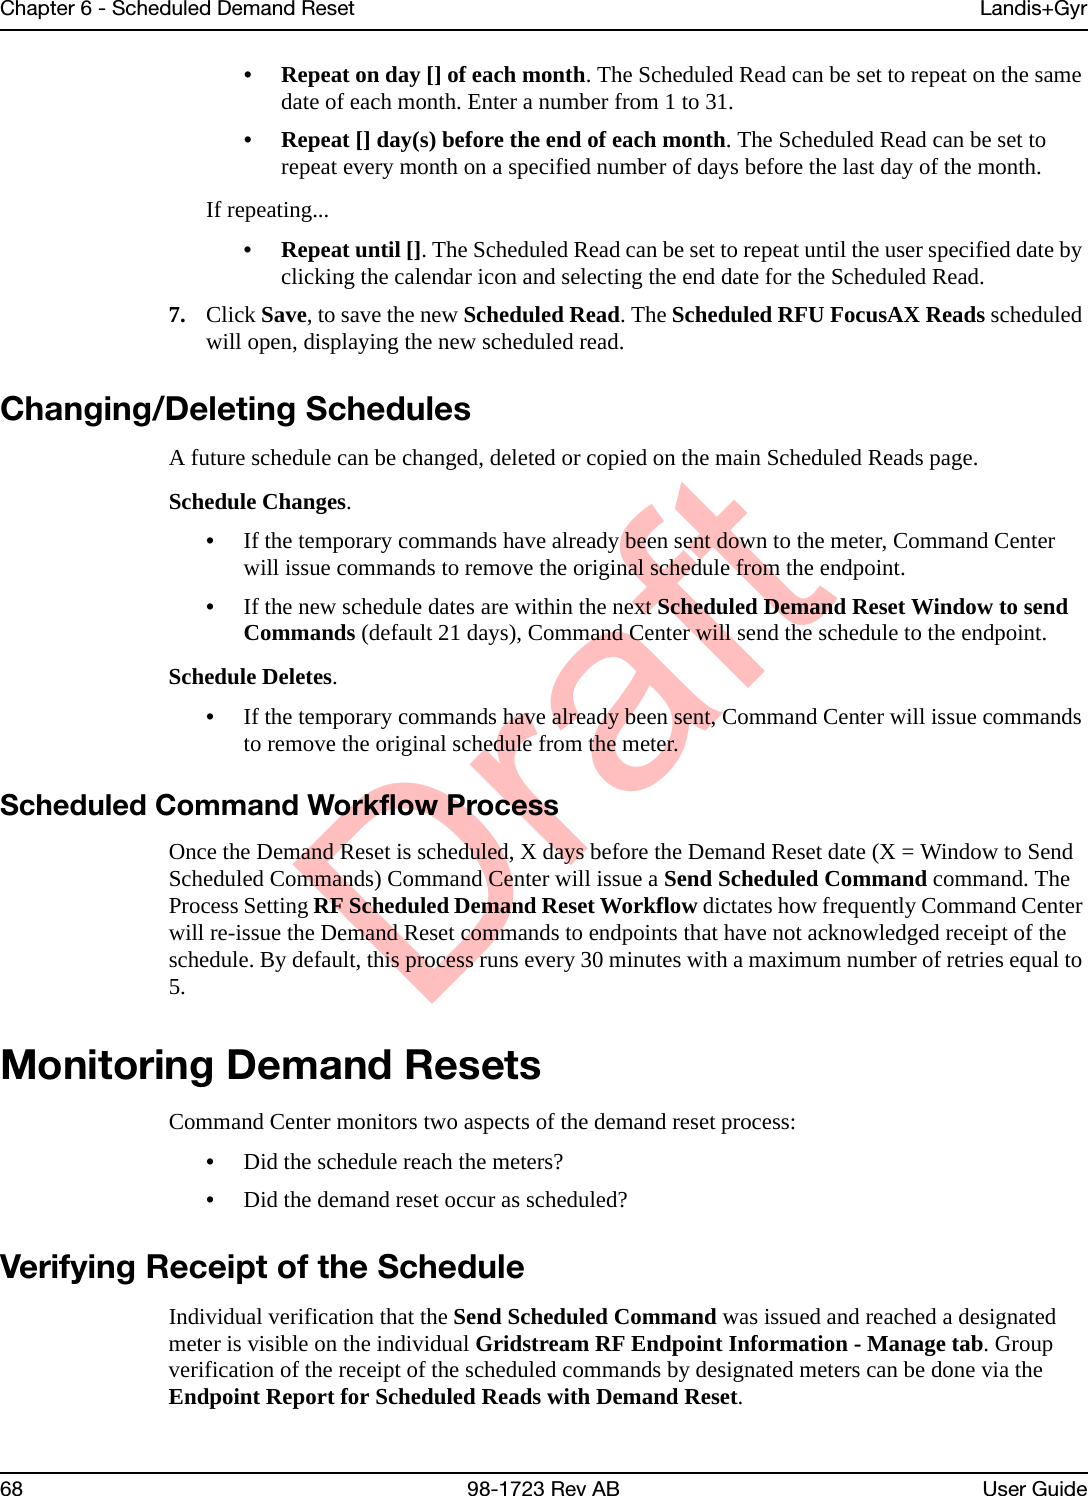 DraftChapter 6 - Scheduled Demand Reset Landis+Gyr68 98-1723 Rev AB User Guide• Repeat on day [] of each month. The Scheduled Read can be set to repeat on the same date of each month. Enter a number from 1 to 31.• Repeat [] day(s) before the end of each month. The Scheduled Read can be set to repeat every month on a specified number of days before the last day of the month.If repeating...• Repeat until []. The Scheduled Read can be set to repeat until the user specified date by clicking the calendar icon and selecting the end date for the Scheduled Read.7. Click Save, to save the new Scheduled Read. The Scheduled RFU FocusAX Reads scheduled will open, displaying the new scheduled read.Changing/Deleting SchedulesA future schedule can be changed, deleted or copied on the main Scheduled Reads page.Schedule Changes.•If the temporary commands have already been sent down to the meter, Command Center will issue commands to remove the original schedule from the endpoint.•If the new schedule dates are within the next Scheduled Demand Reset Window to send Commands (default 21 days), Command Center will send the schedule to the endpoint. Schedule Deletes.•If the temporary commands have already been sent, Command Center will issue commands to remove the original schedule from the meter.Scheduled Command Workflow ProcessOnce the Demand Reset is scheduled, X days before the Demand Reset date (X = Window to Send Scheduled Commands) Command Center will issue a Send Scheduled Command command. The Process Setting RF Scheduled Demand Reset Workflow dictates how frequently Command Center will re-issue the Demand Reset commands to endpoints that have not acknowledged receipt of the schedule. By default, this process runs every 30 minutes with a maximum number of retries equal to 5. Monitoring Demand ResetsCommand Center monitors two aspects of the demand reset process:•Did the schedule reach the meters?•Did the demand reset occur as scheduled?Verifying Receipt of the ScheduleIndividual verification that the Send Scheduled Command was issued and reached a designated meter is visible on the individual Gridstream RF Endpoint Information - Manage tab. Group verification of the receipt of the scheduled commands by designated meters can be done via the Endpoint Report for Scheduled Reads with Demand Reset.